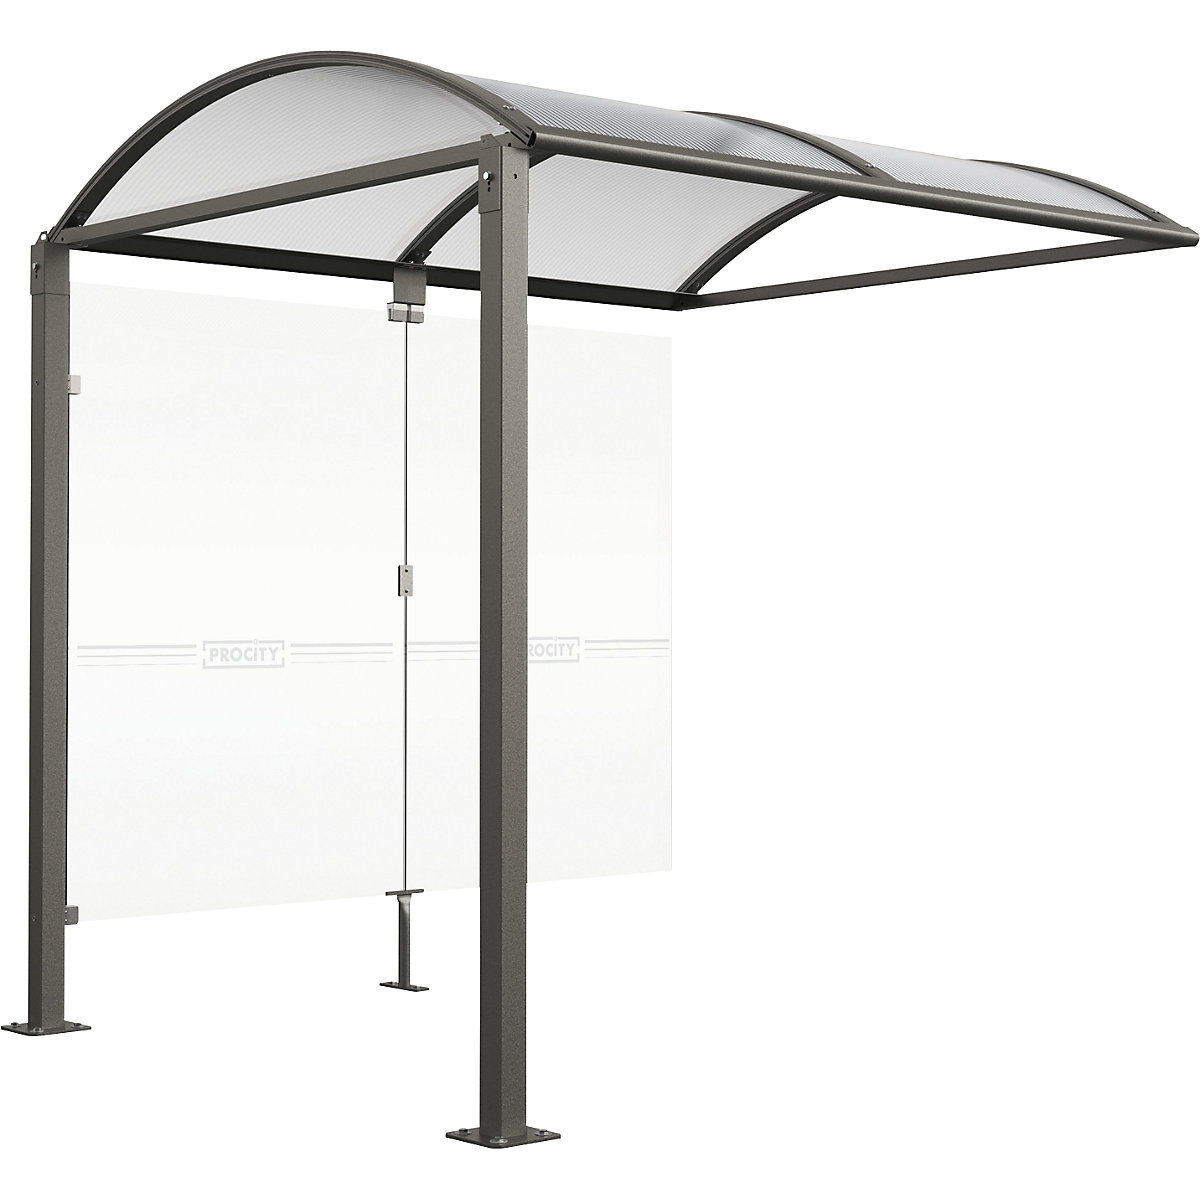 Bicycle shelter with glass – PROCITY